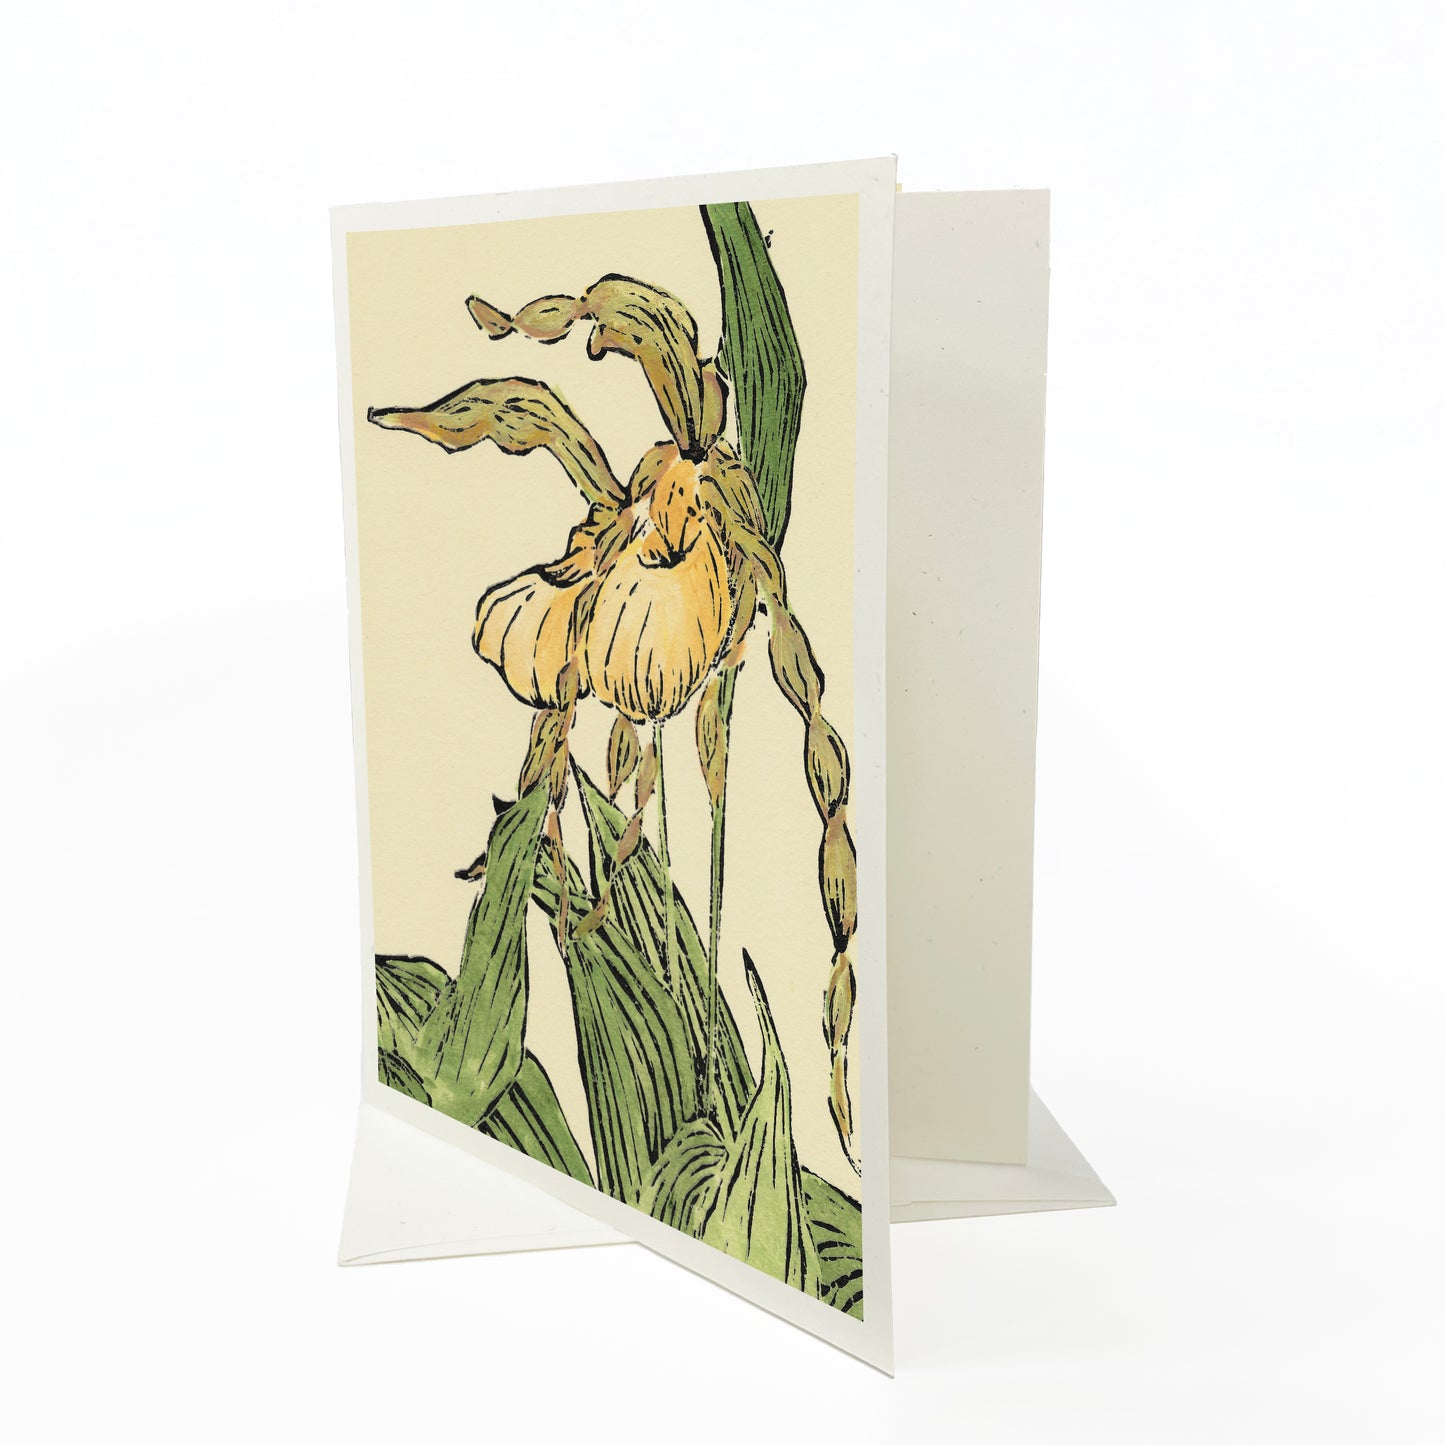 A casually elegant card featuring Michigan wildflowers art by Natalia Wohletz titled Lady's Slipper Pair #2.